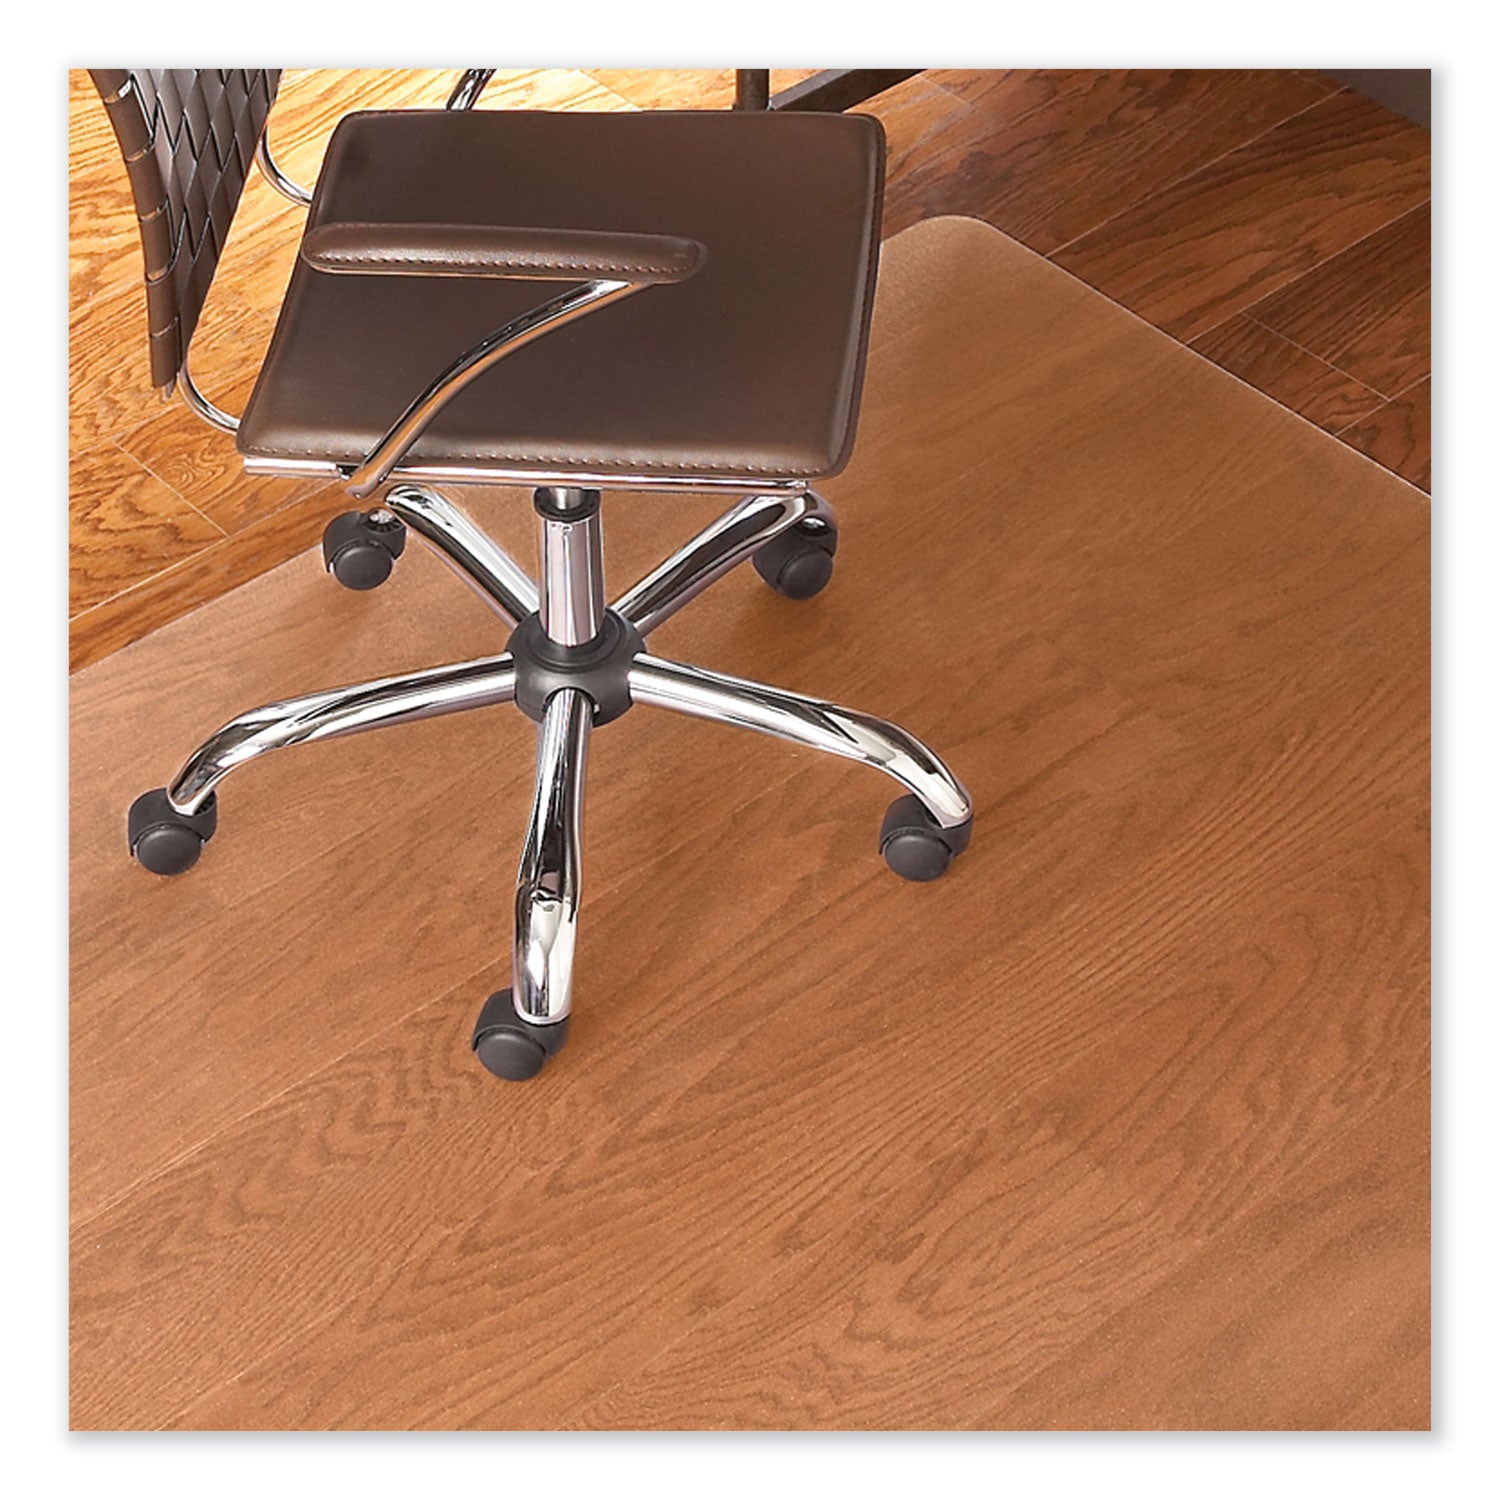 everlife-chair-mat-for-hard-floors-heavy-use-rectangular-60-x-96-clear-ships-in-4-6-business-days_esr132831 - 3